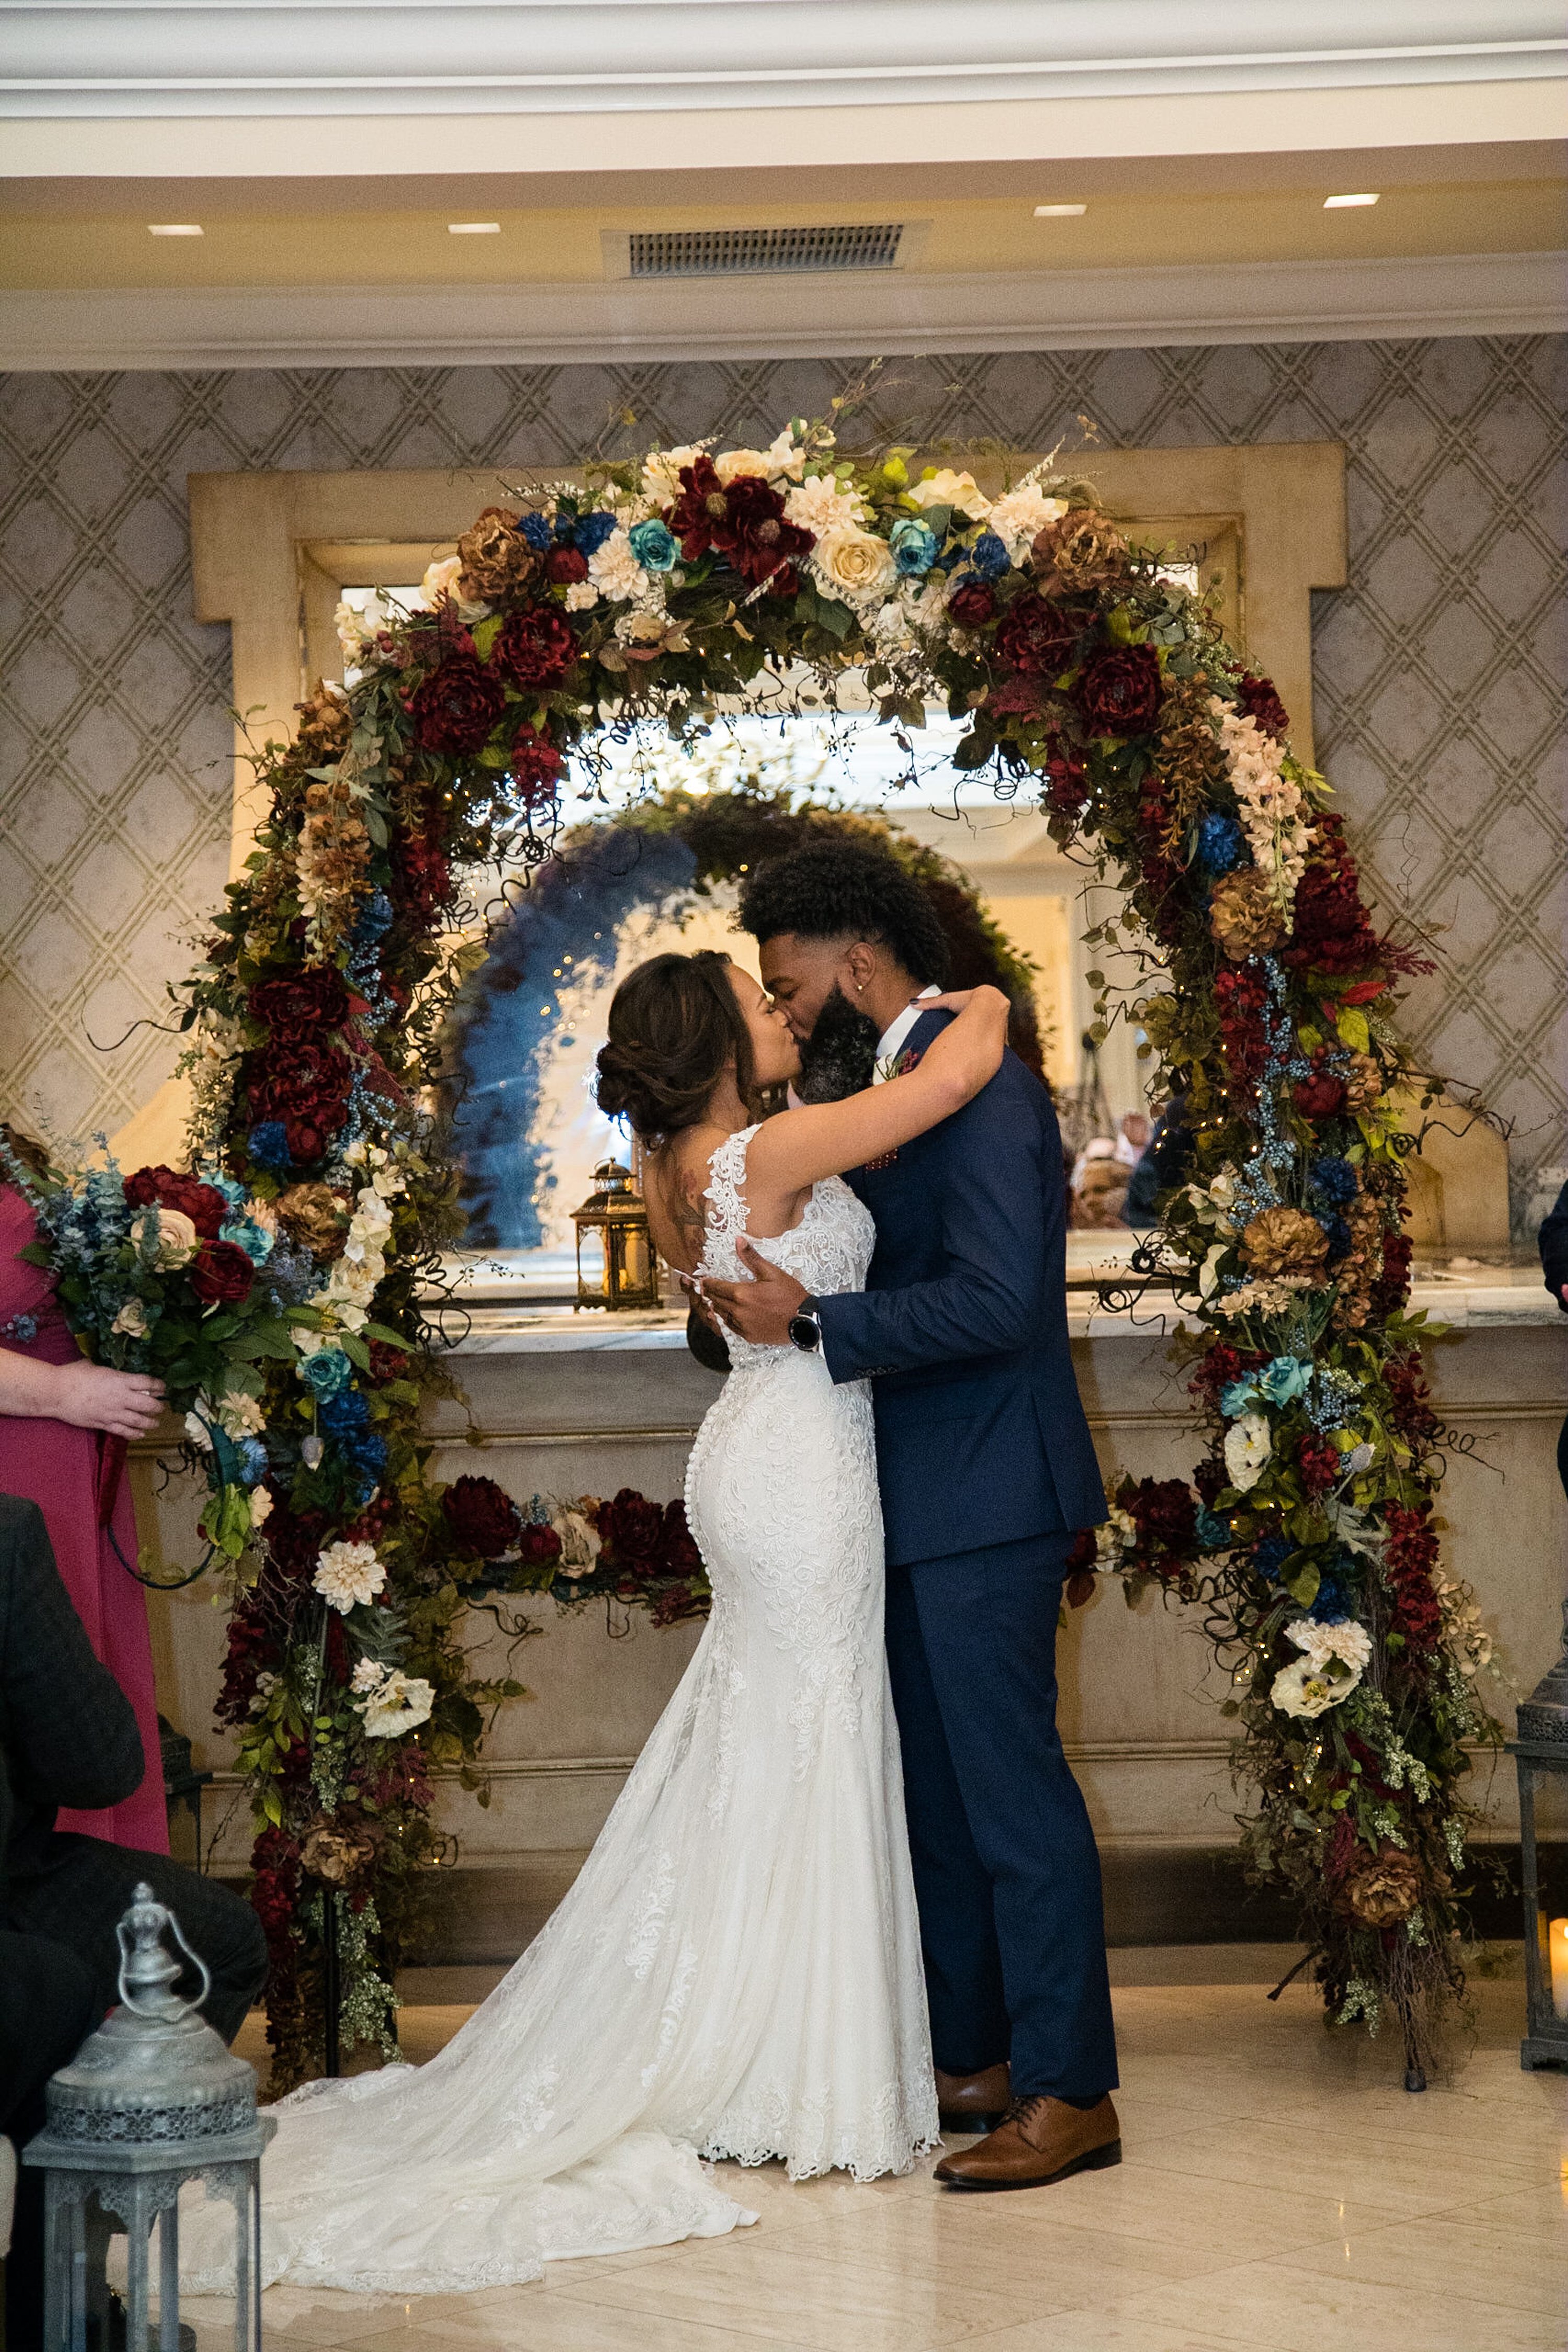  Darian and Holland's wedding at the Rosewood Mansion in Dallas, december wedding